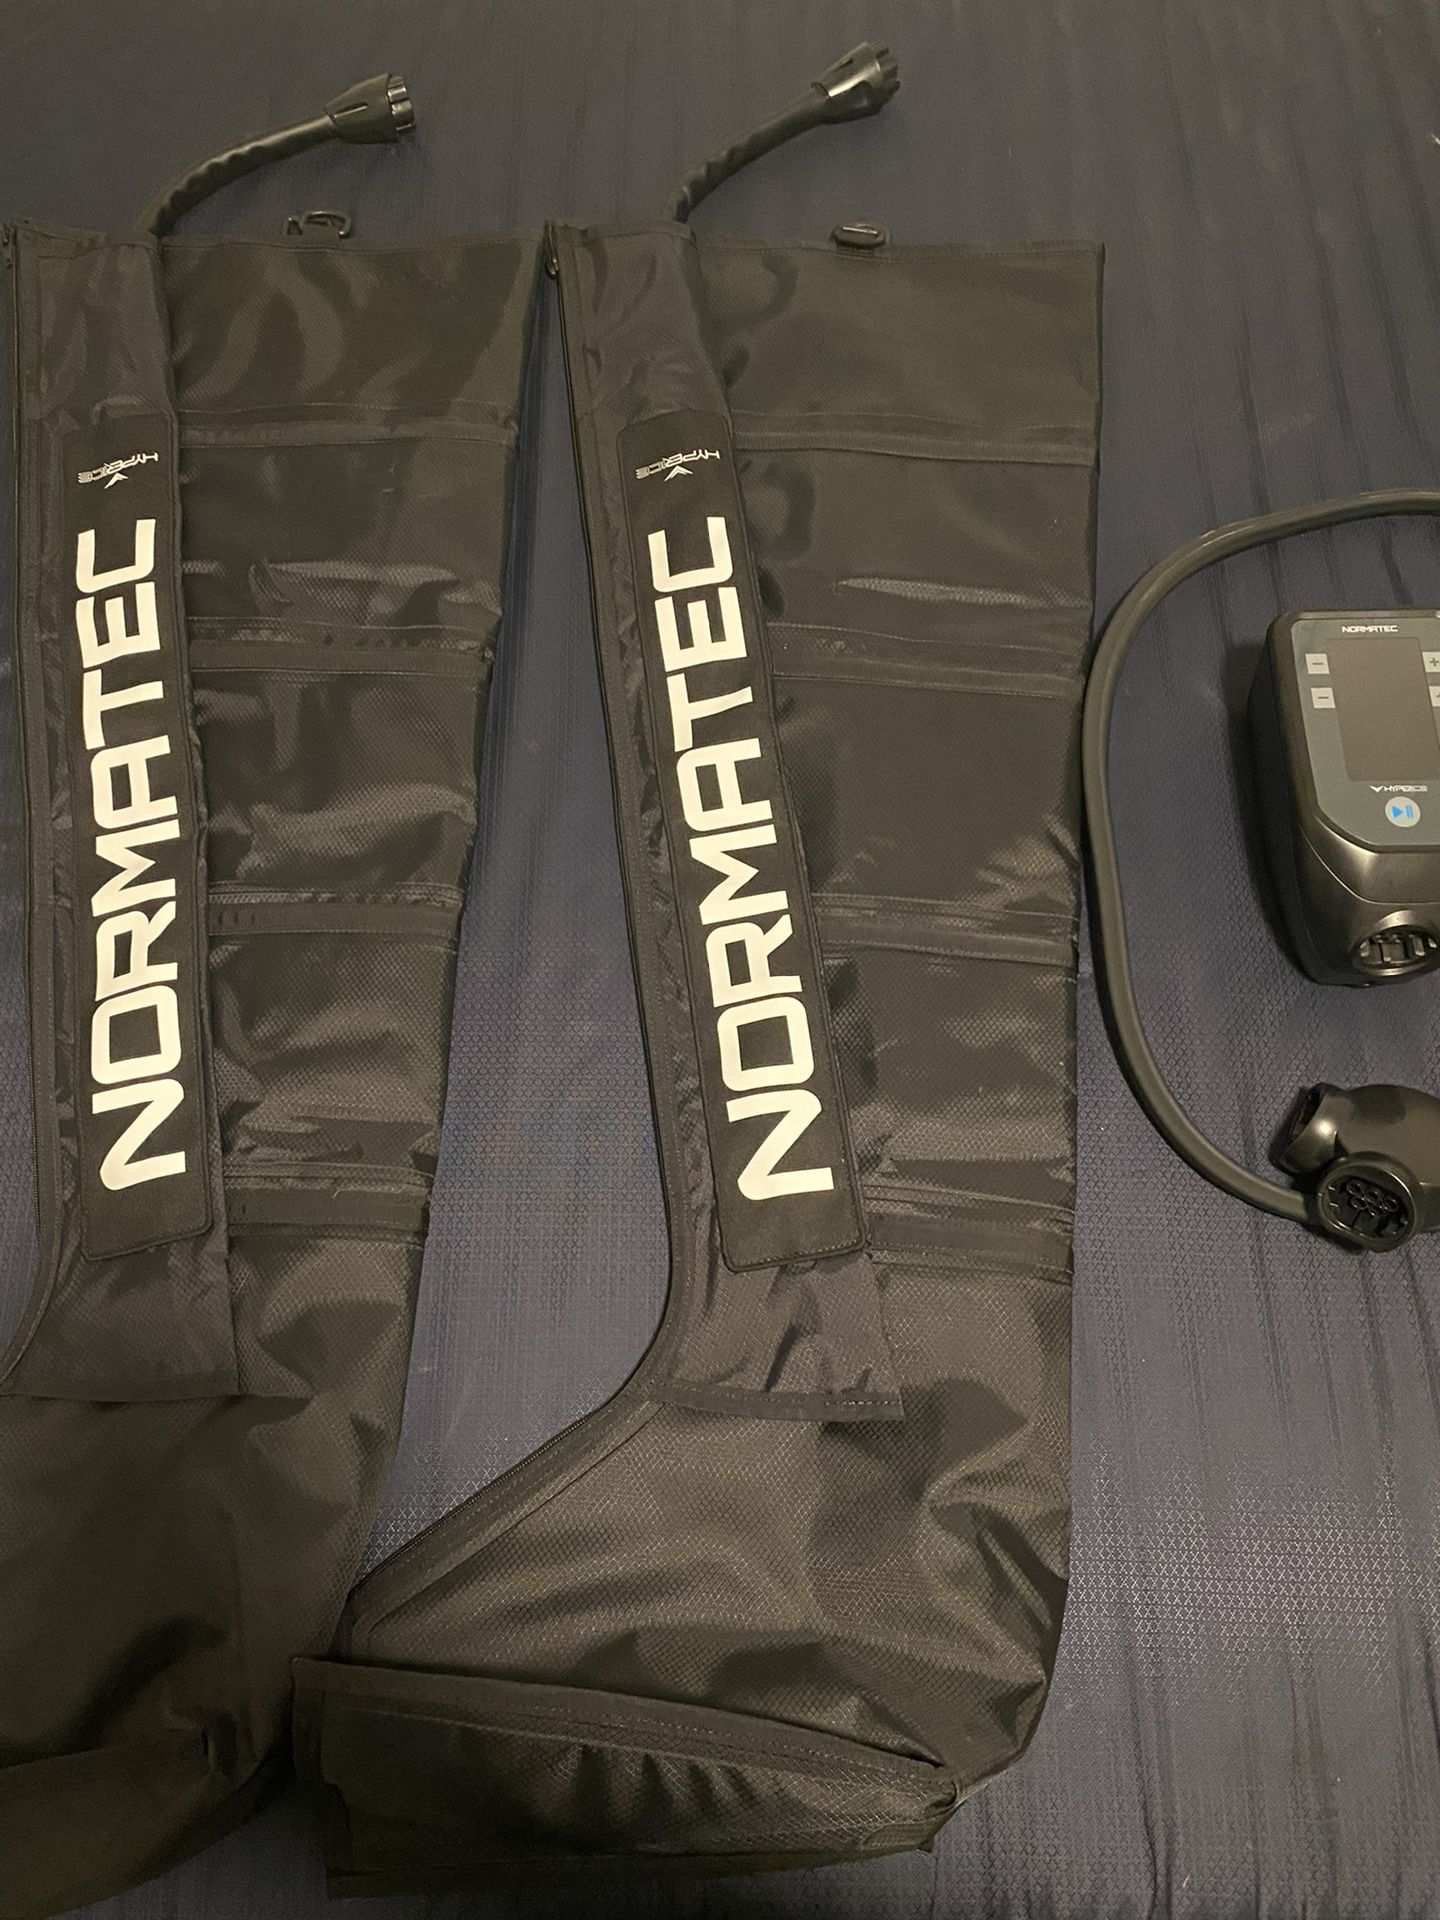 Normatec Recovery Kit